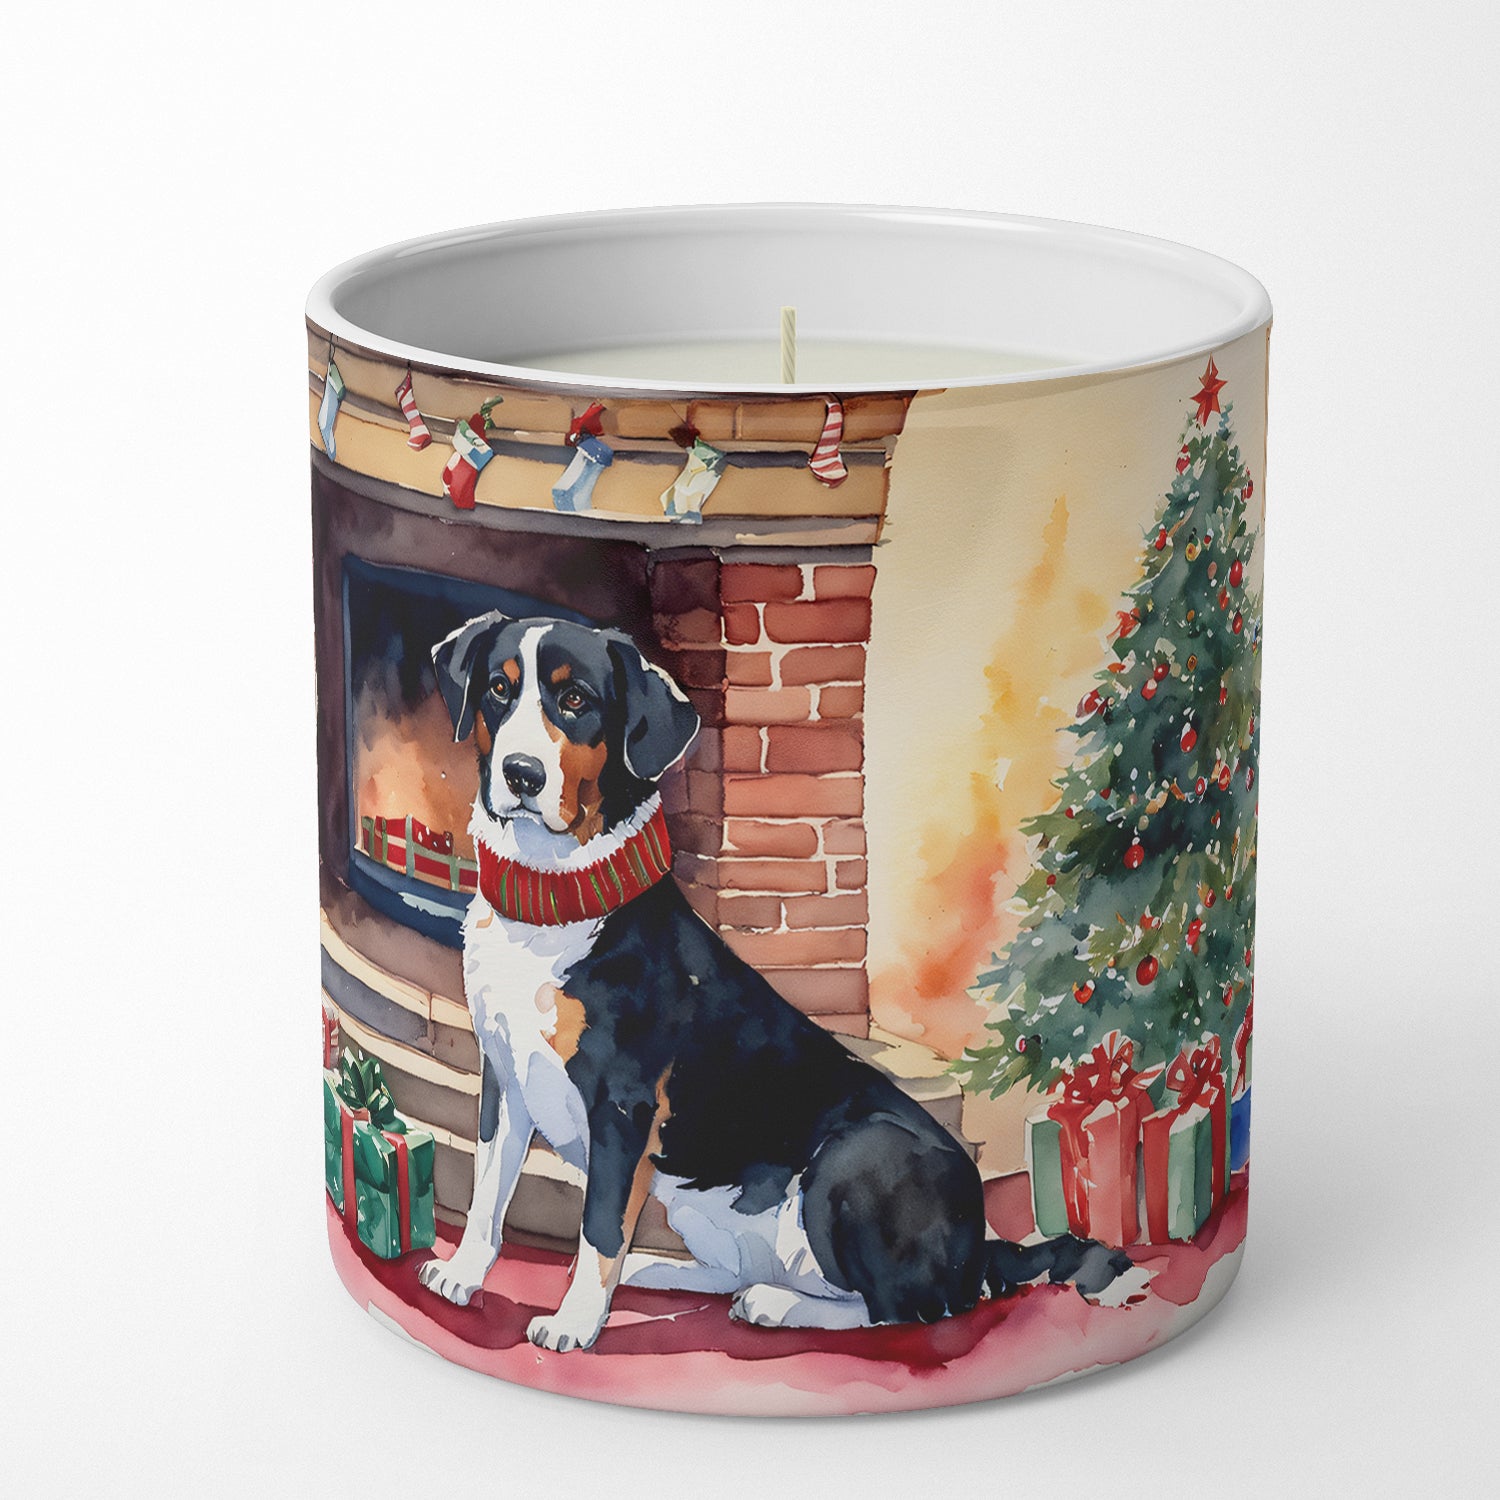 Buy this Appenzeller Sennenhund Cozy Christmas Decorative Soy Candle